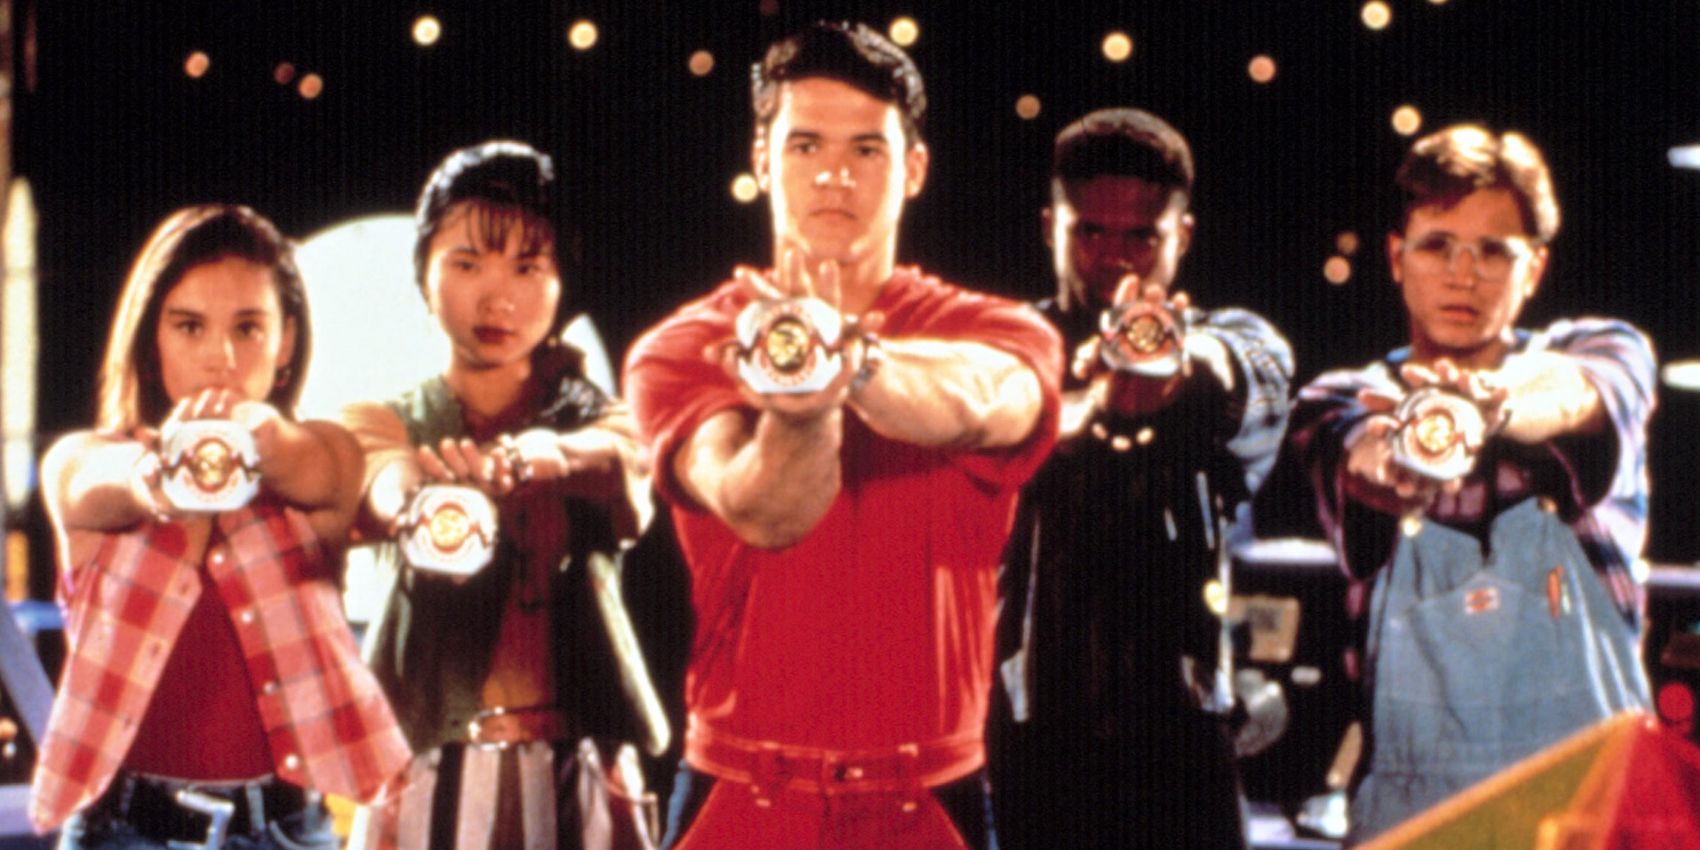 Jason leads the morphing call in Mighty Morphin Power Rangers